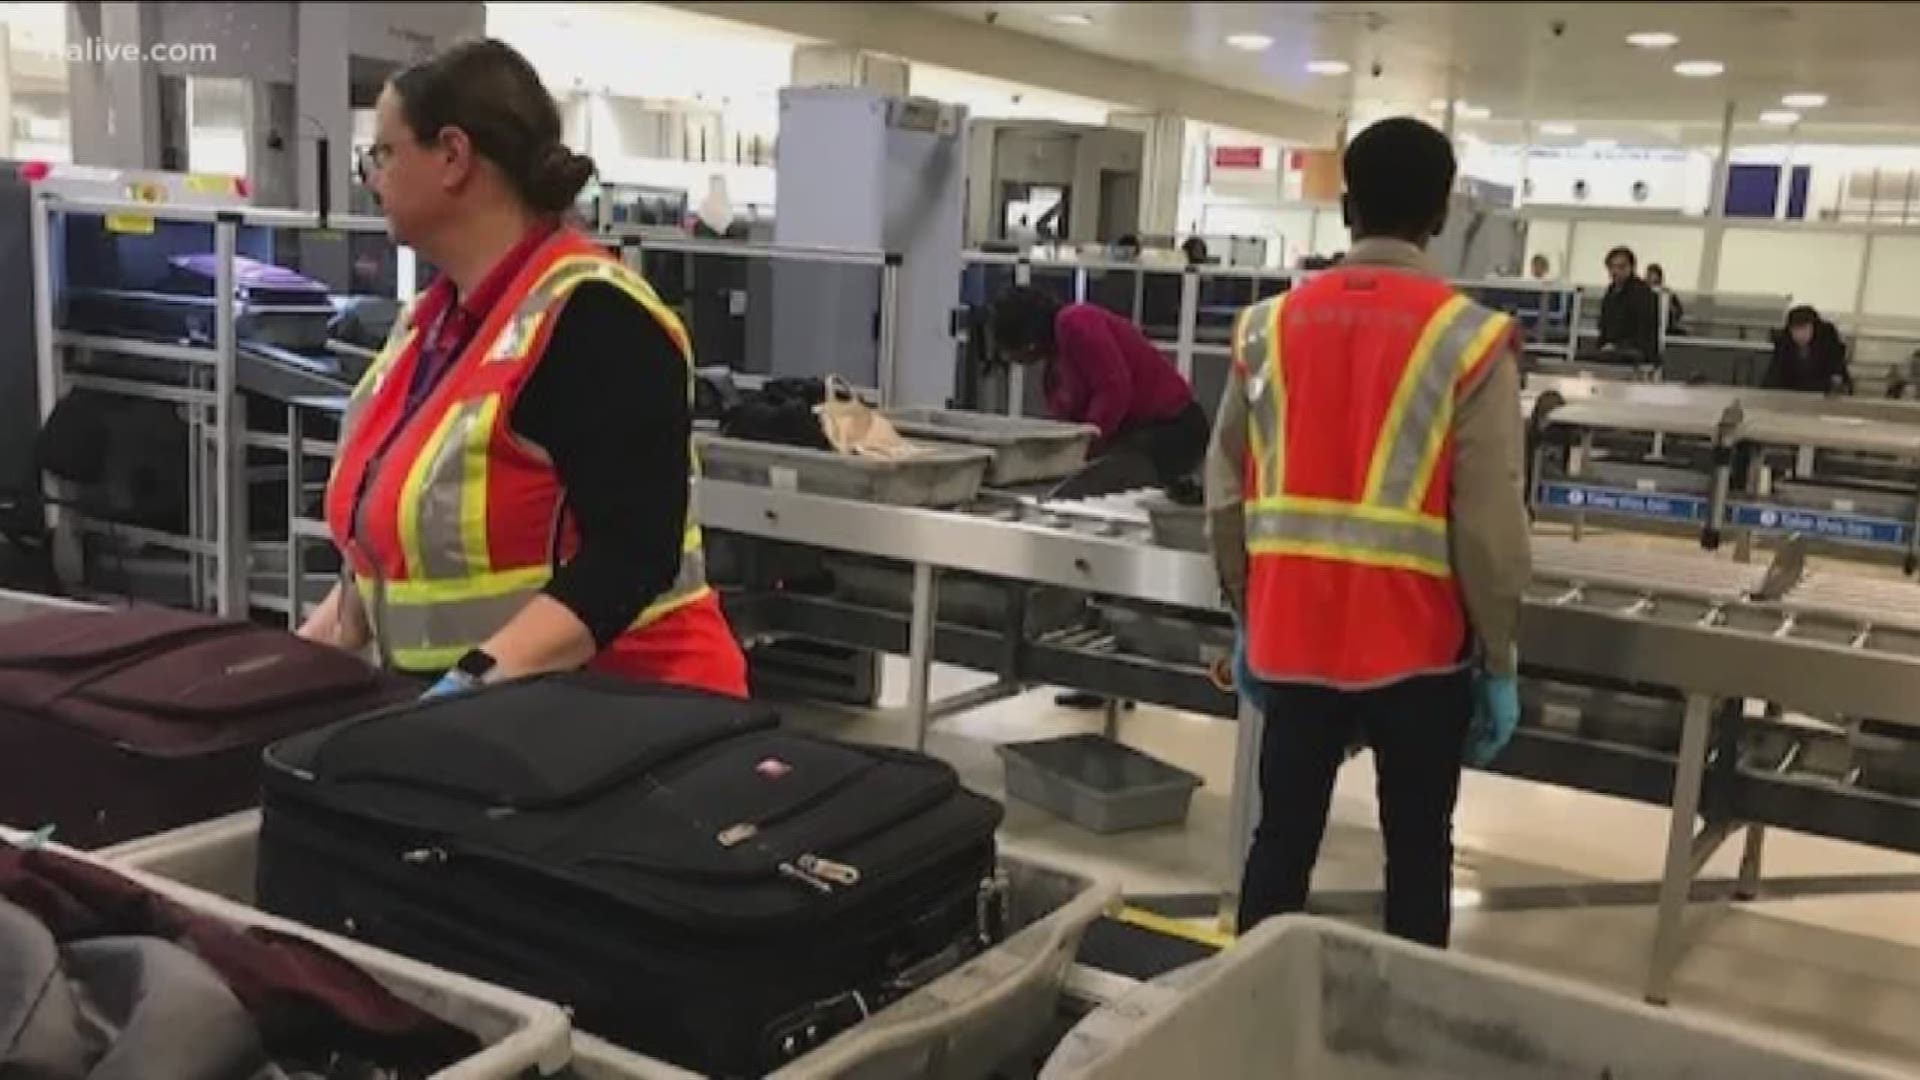 Airline workers are trying to make sure passengers get through the process as smoothly as possible.